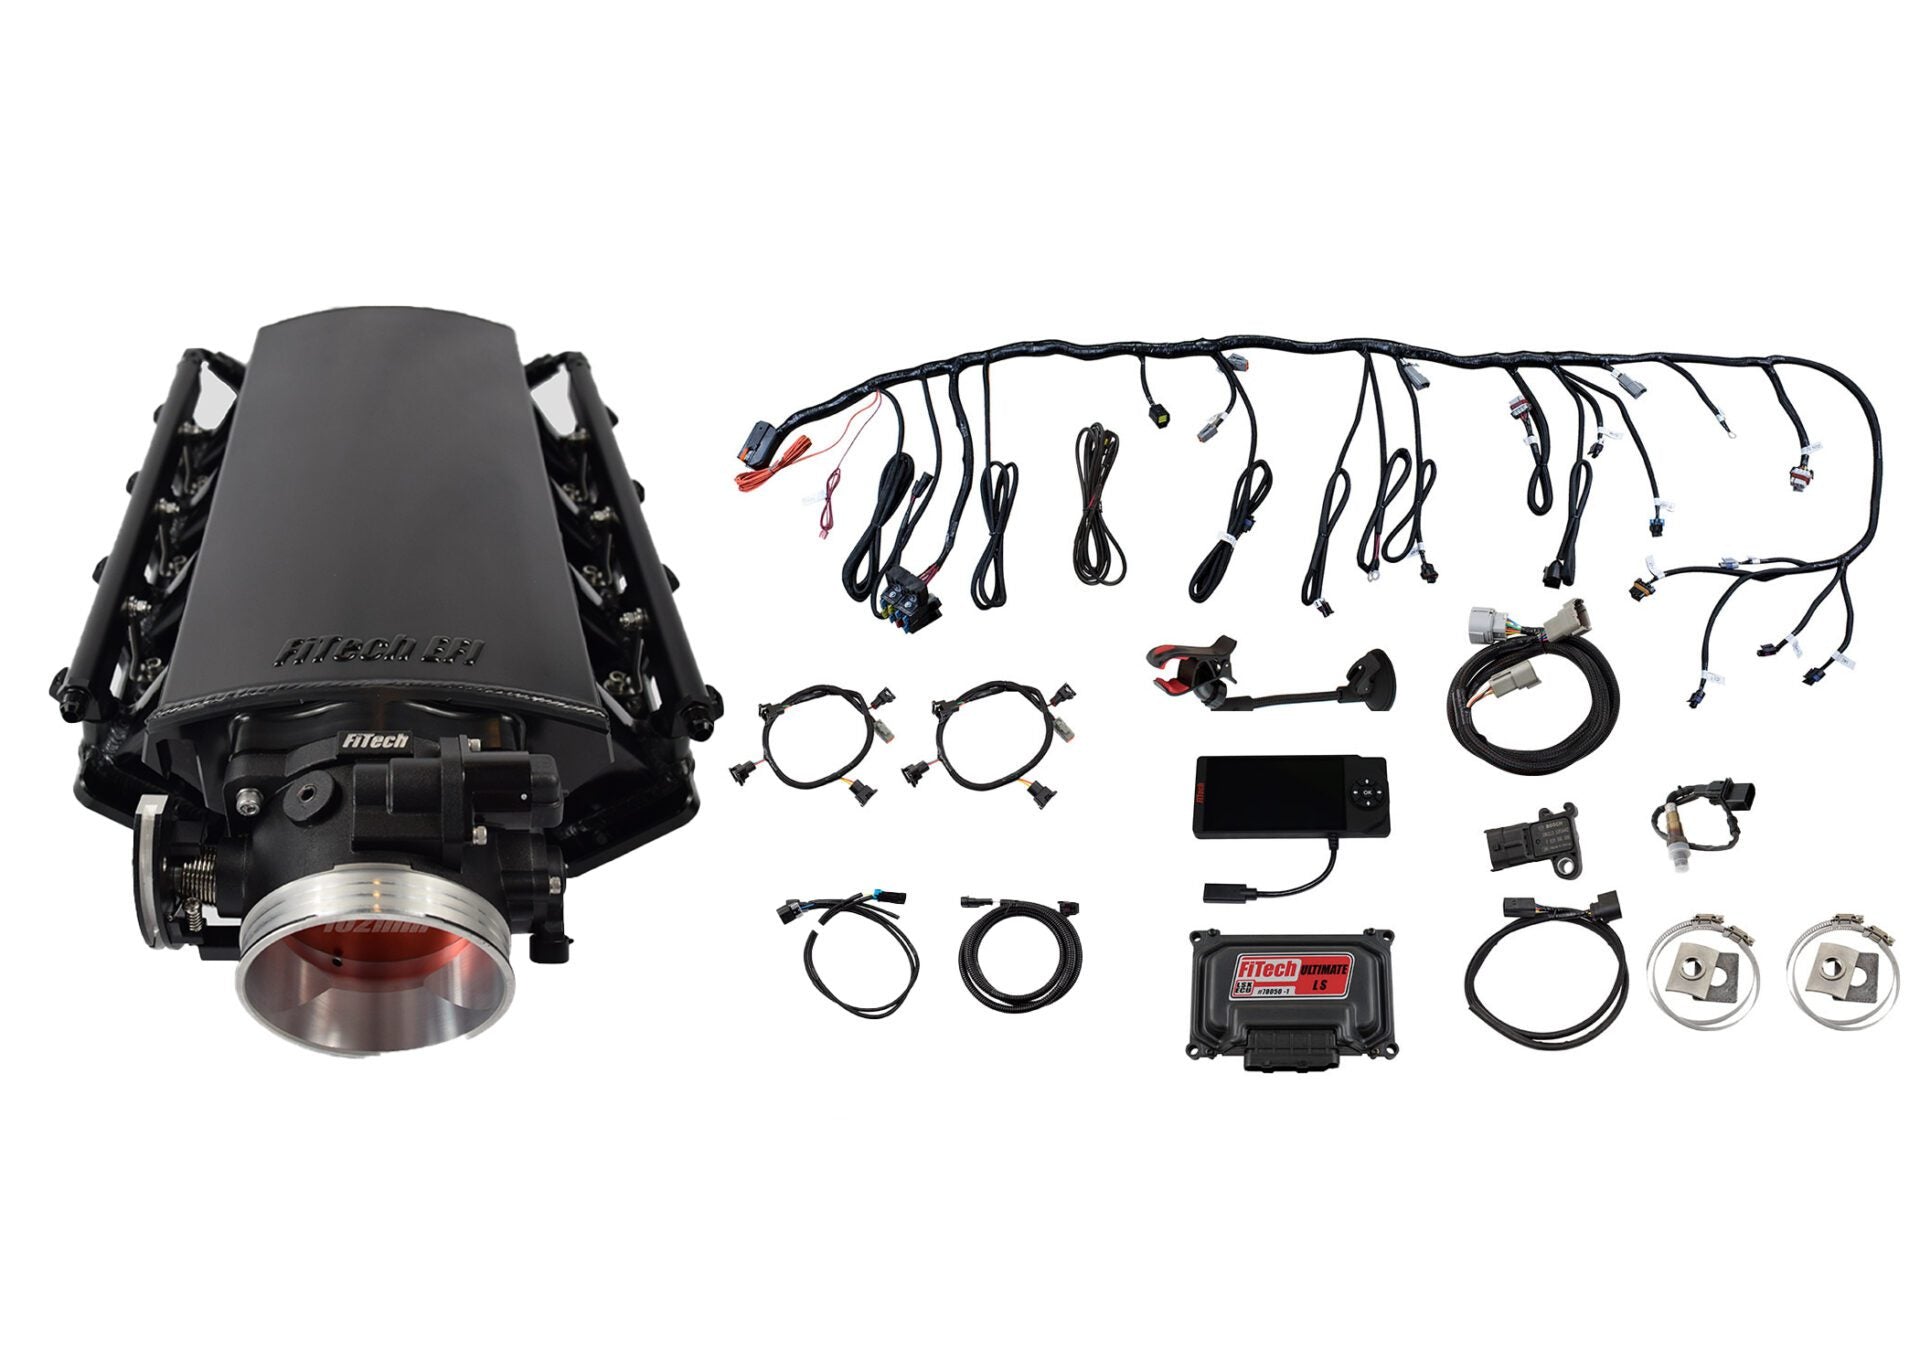 FiTech 70002 Ultimate LS Kit (500 HP, Transmission Control)-for LS1/LS2/LS6